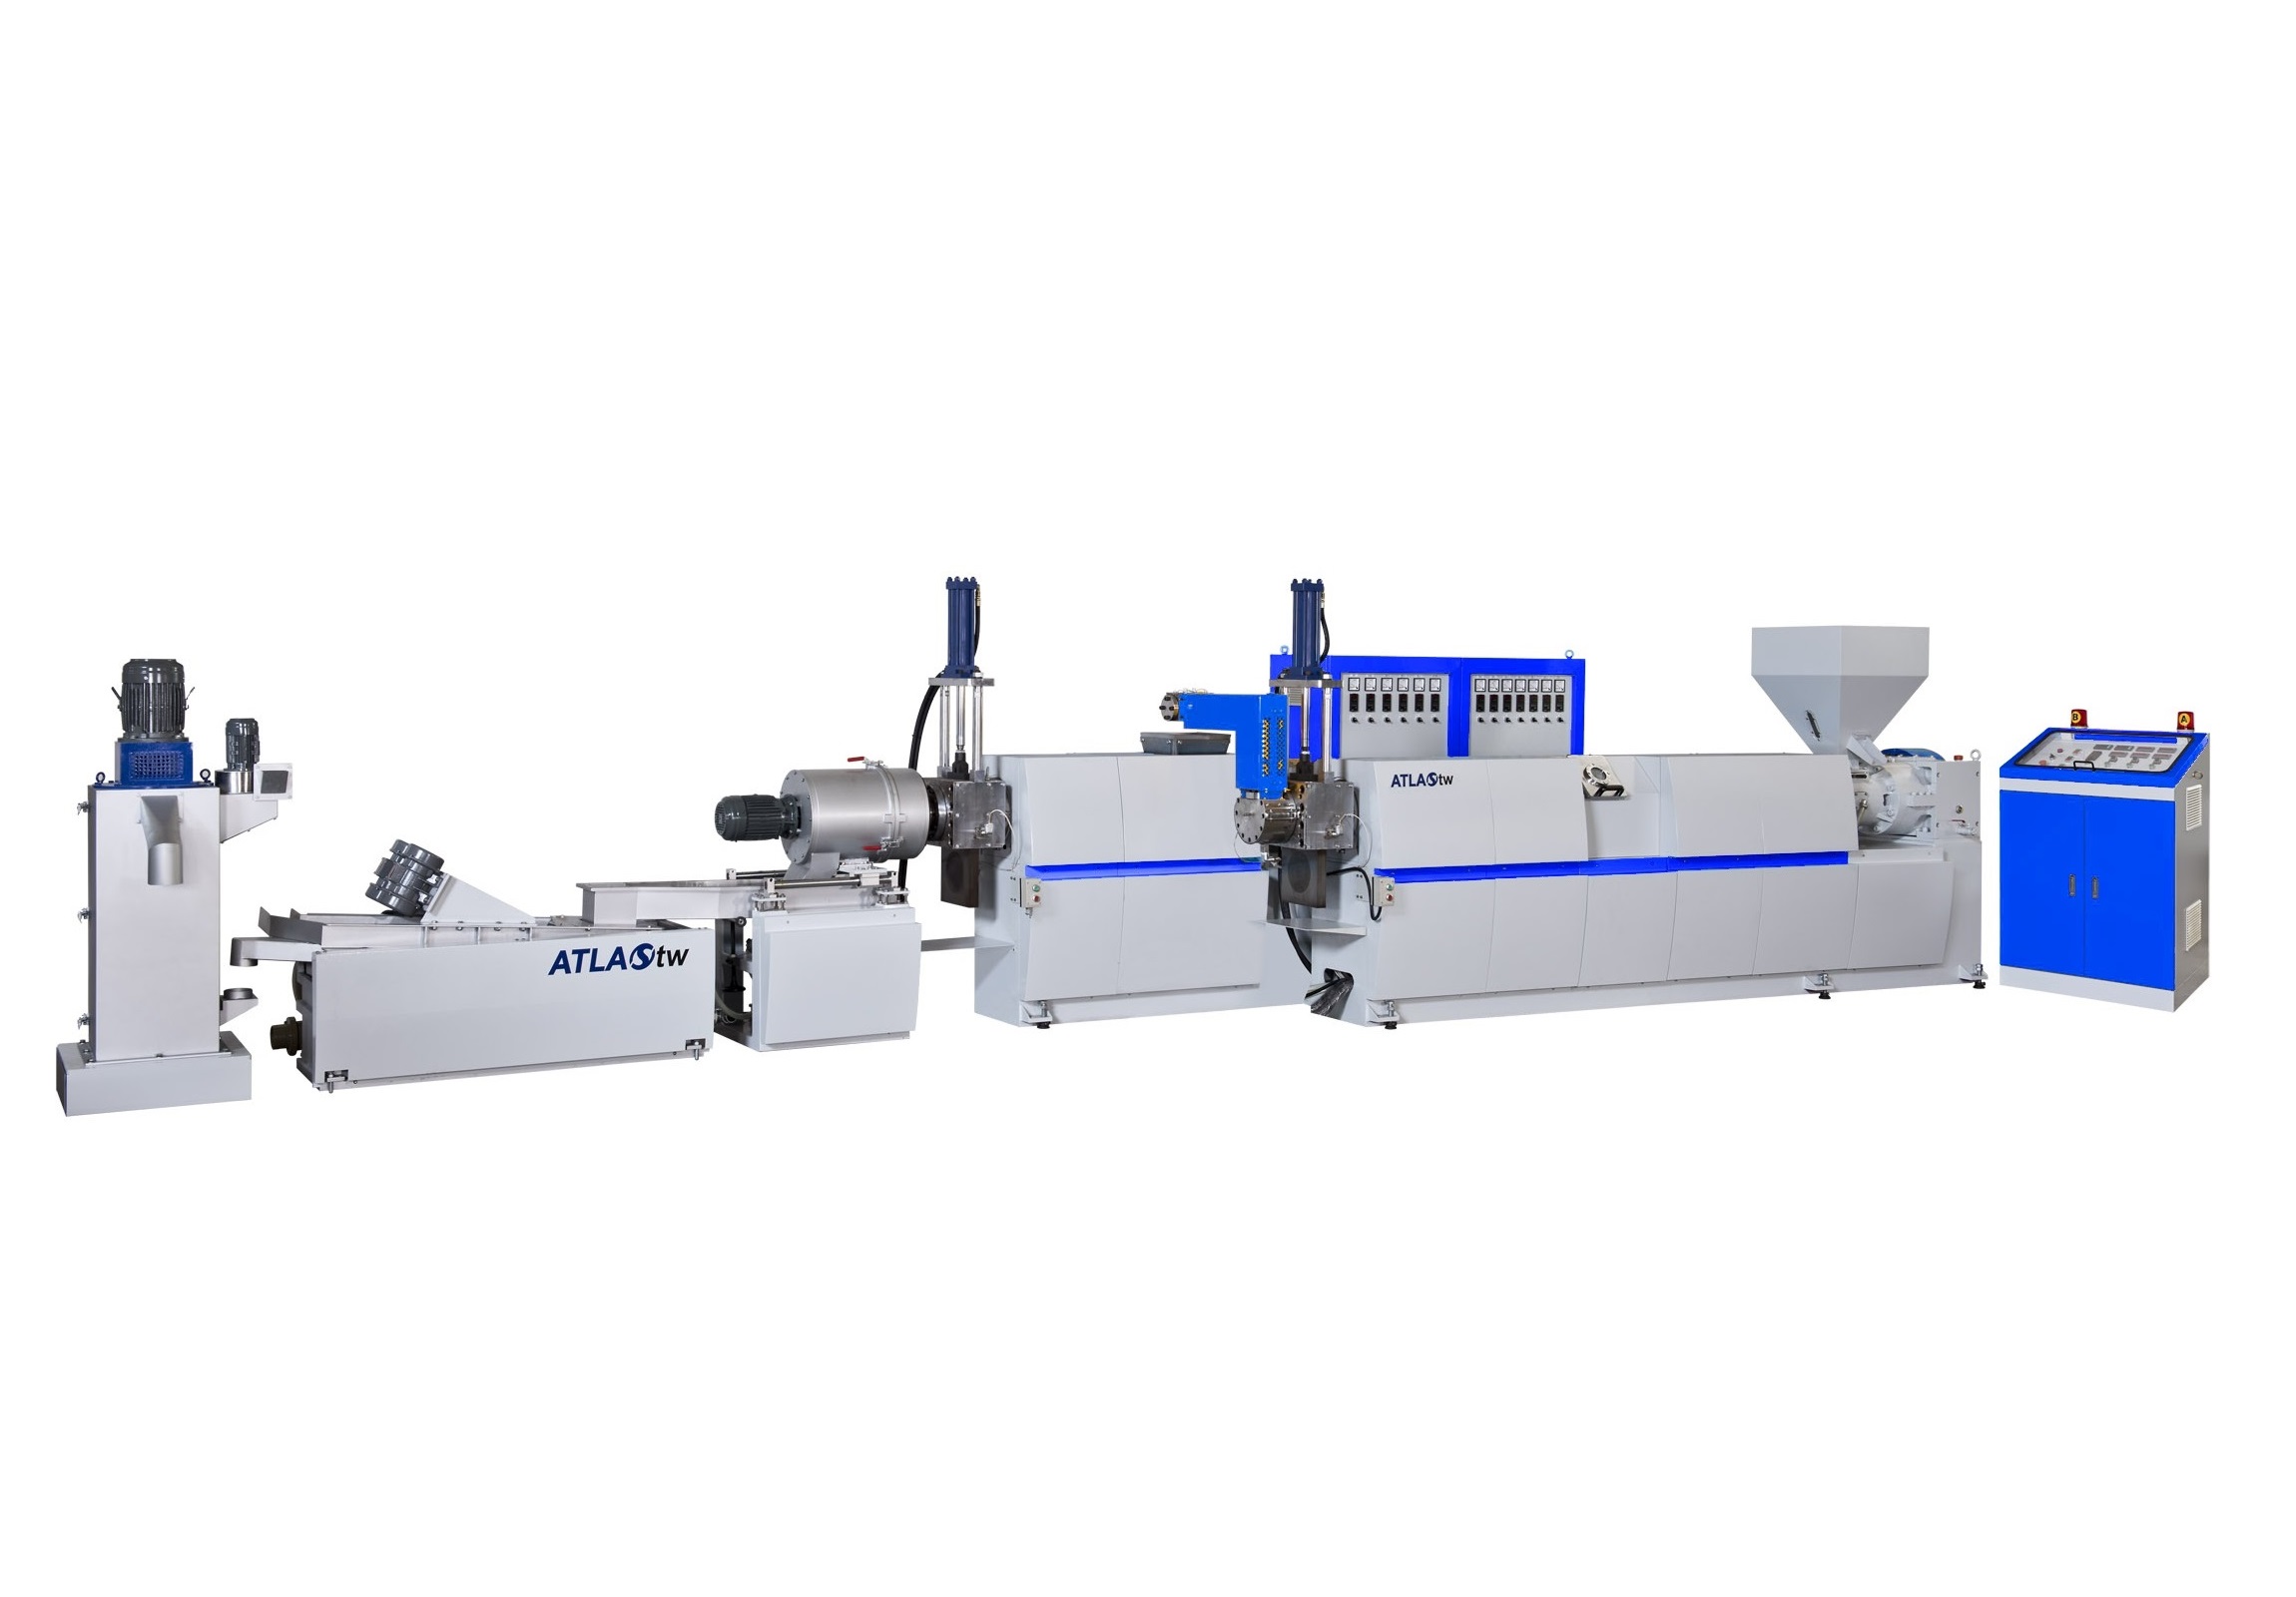 Two Stage Hopper Feeding and Die Face Cutting Plastic Recycling Machine is designed and built mainly for recycling hard crushed plastics and injection materials. Equipped with two extruders, the two-stage model is more capable of filtering dirts and heavy printing inks out of the materials